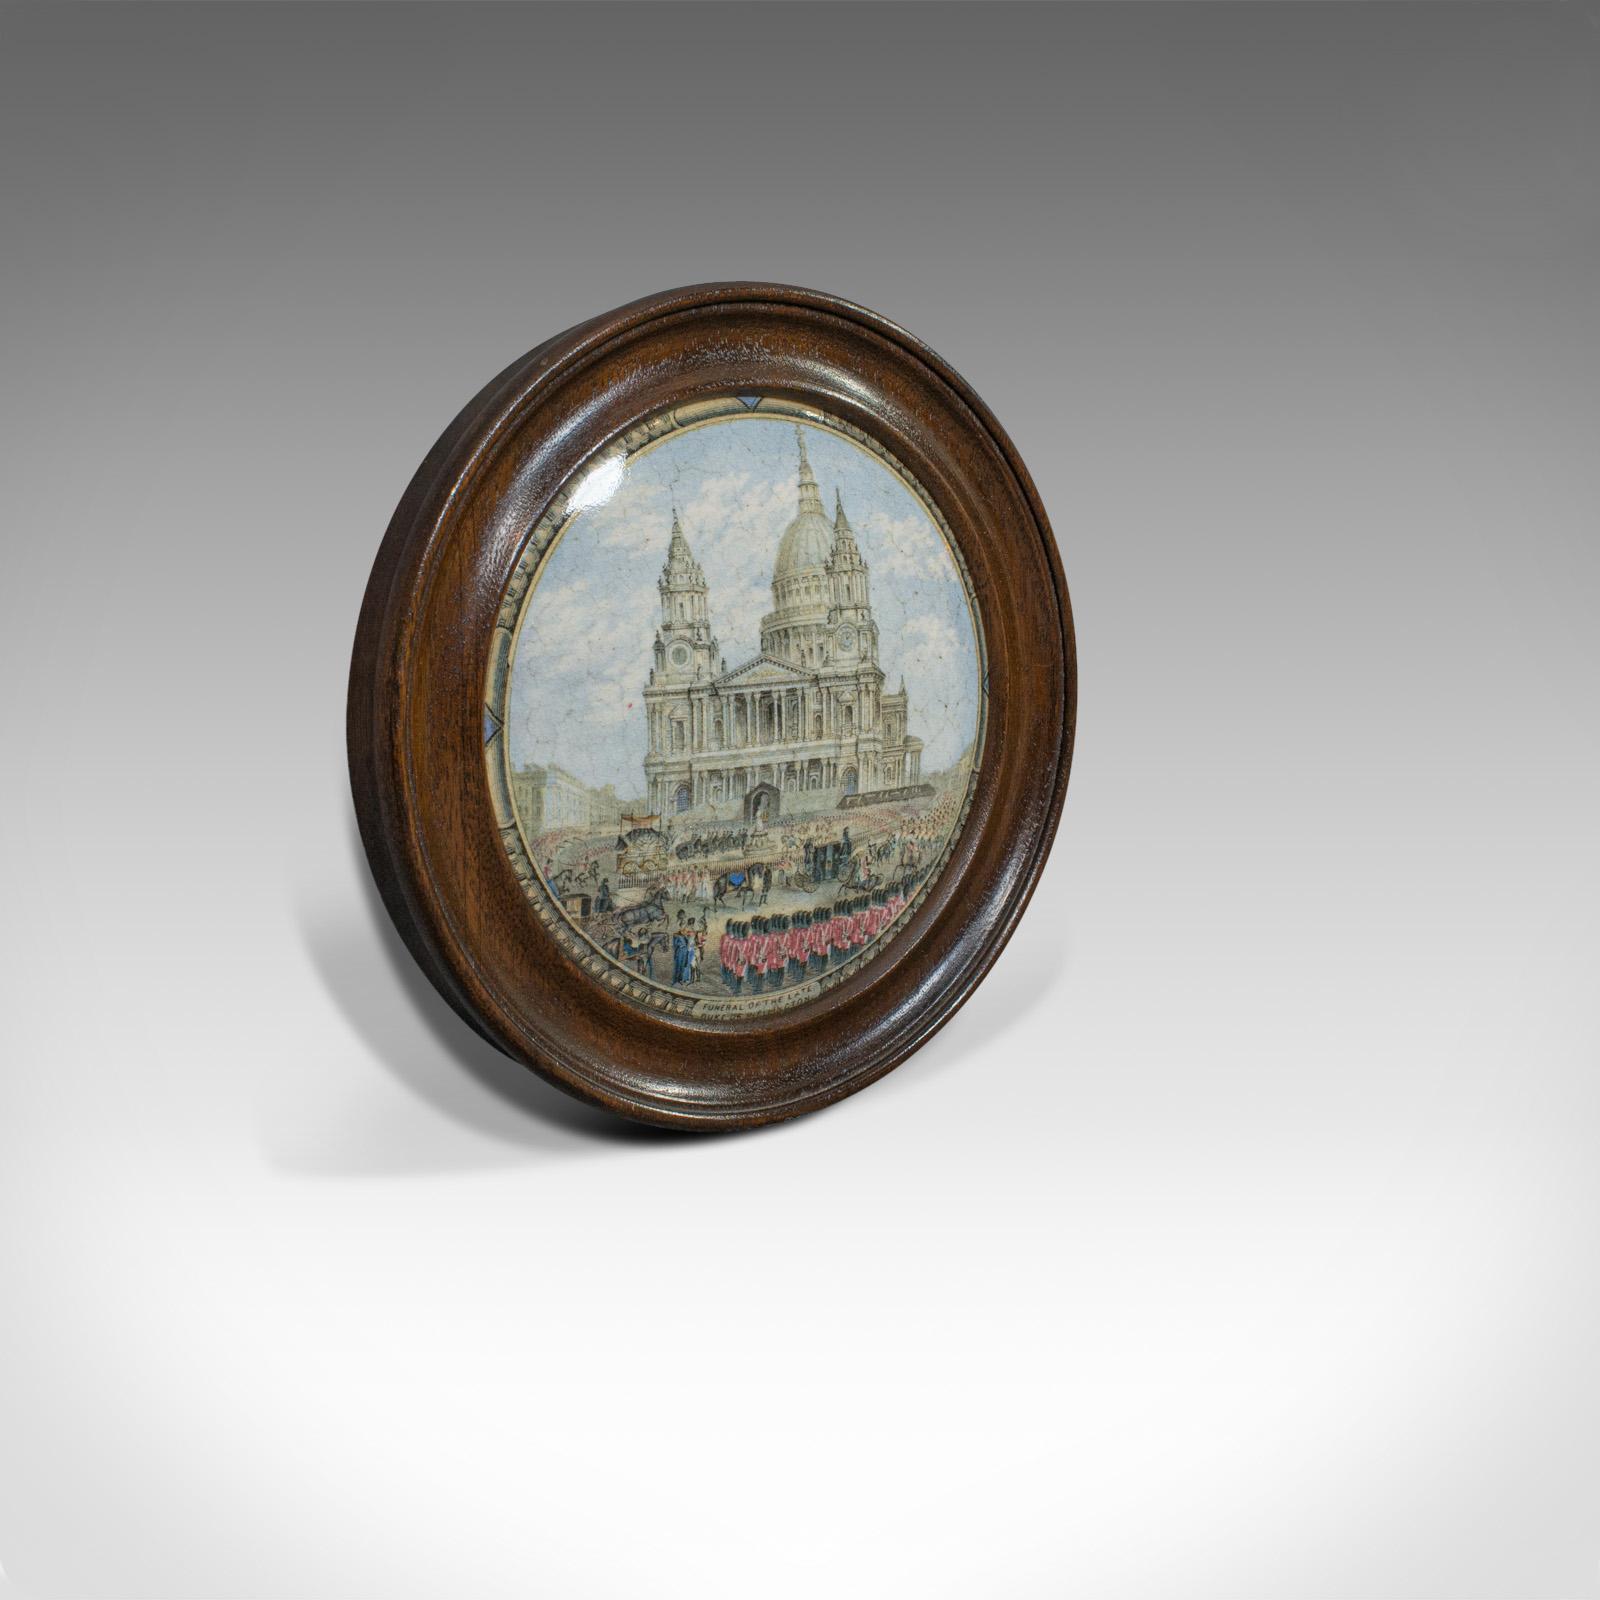 This is an antique Prattware jar lid. An English, mahogany and colour printed ceramic featuring a scene from the Duke of Wellington's funeral and dating to the Victorian period, circa 1860.

In fine form and displaying a desirable aged